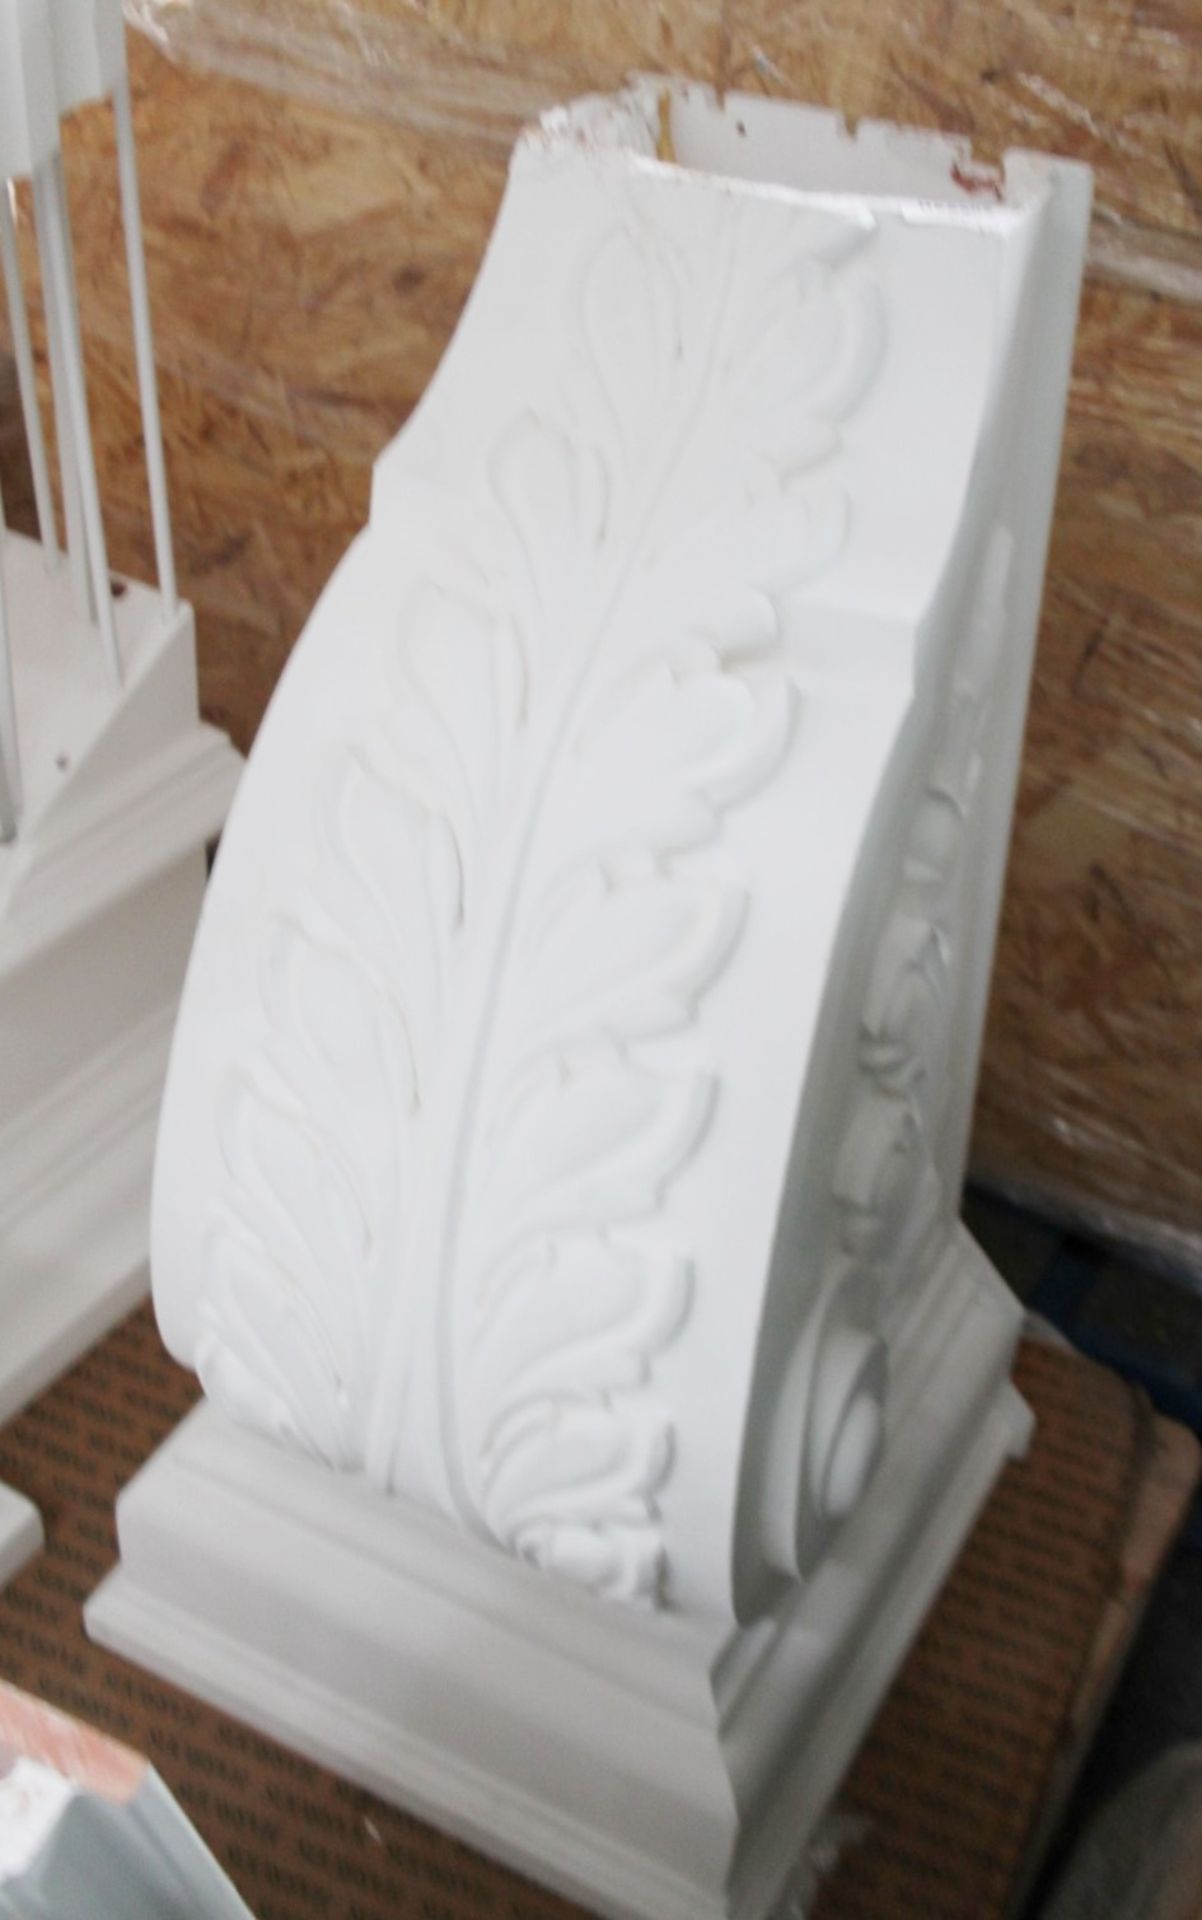 3 x Assorted Sections Of Ornate Display Plinth, Specially Commissioned For A Givenchy Window Display - Image 10 of 11